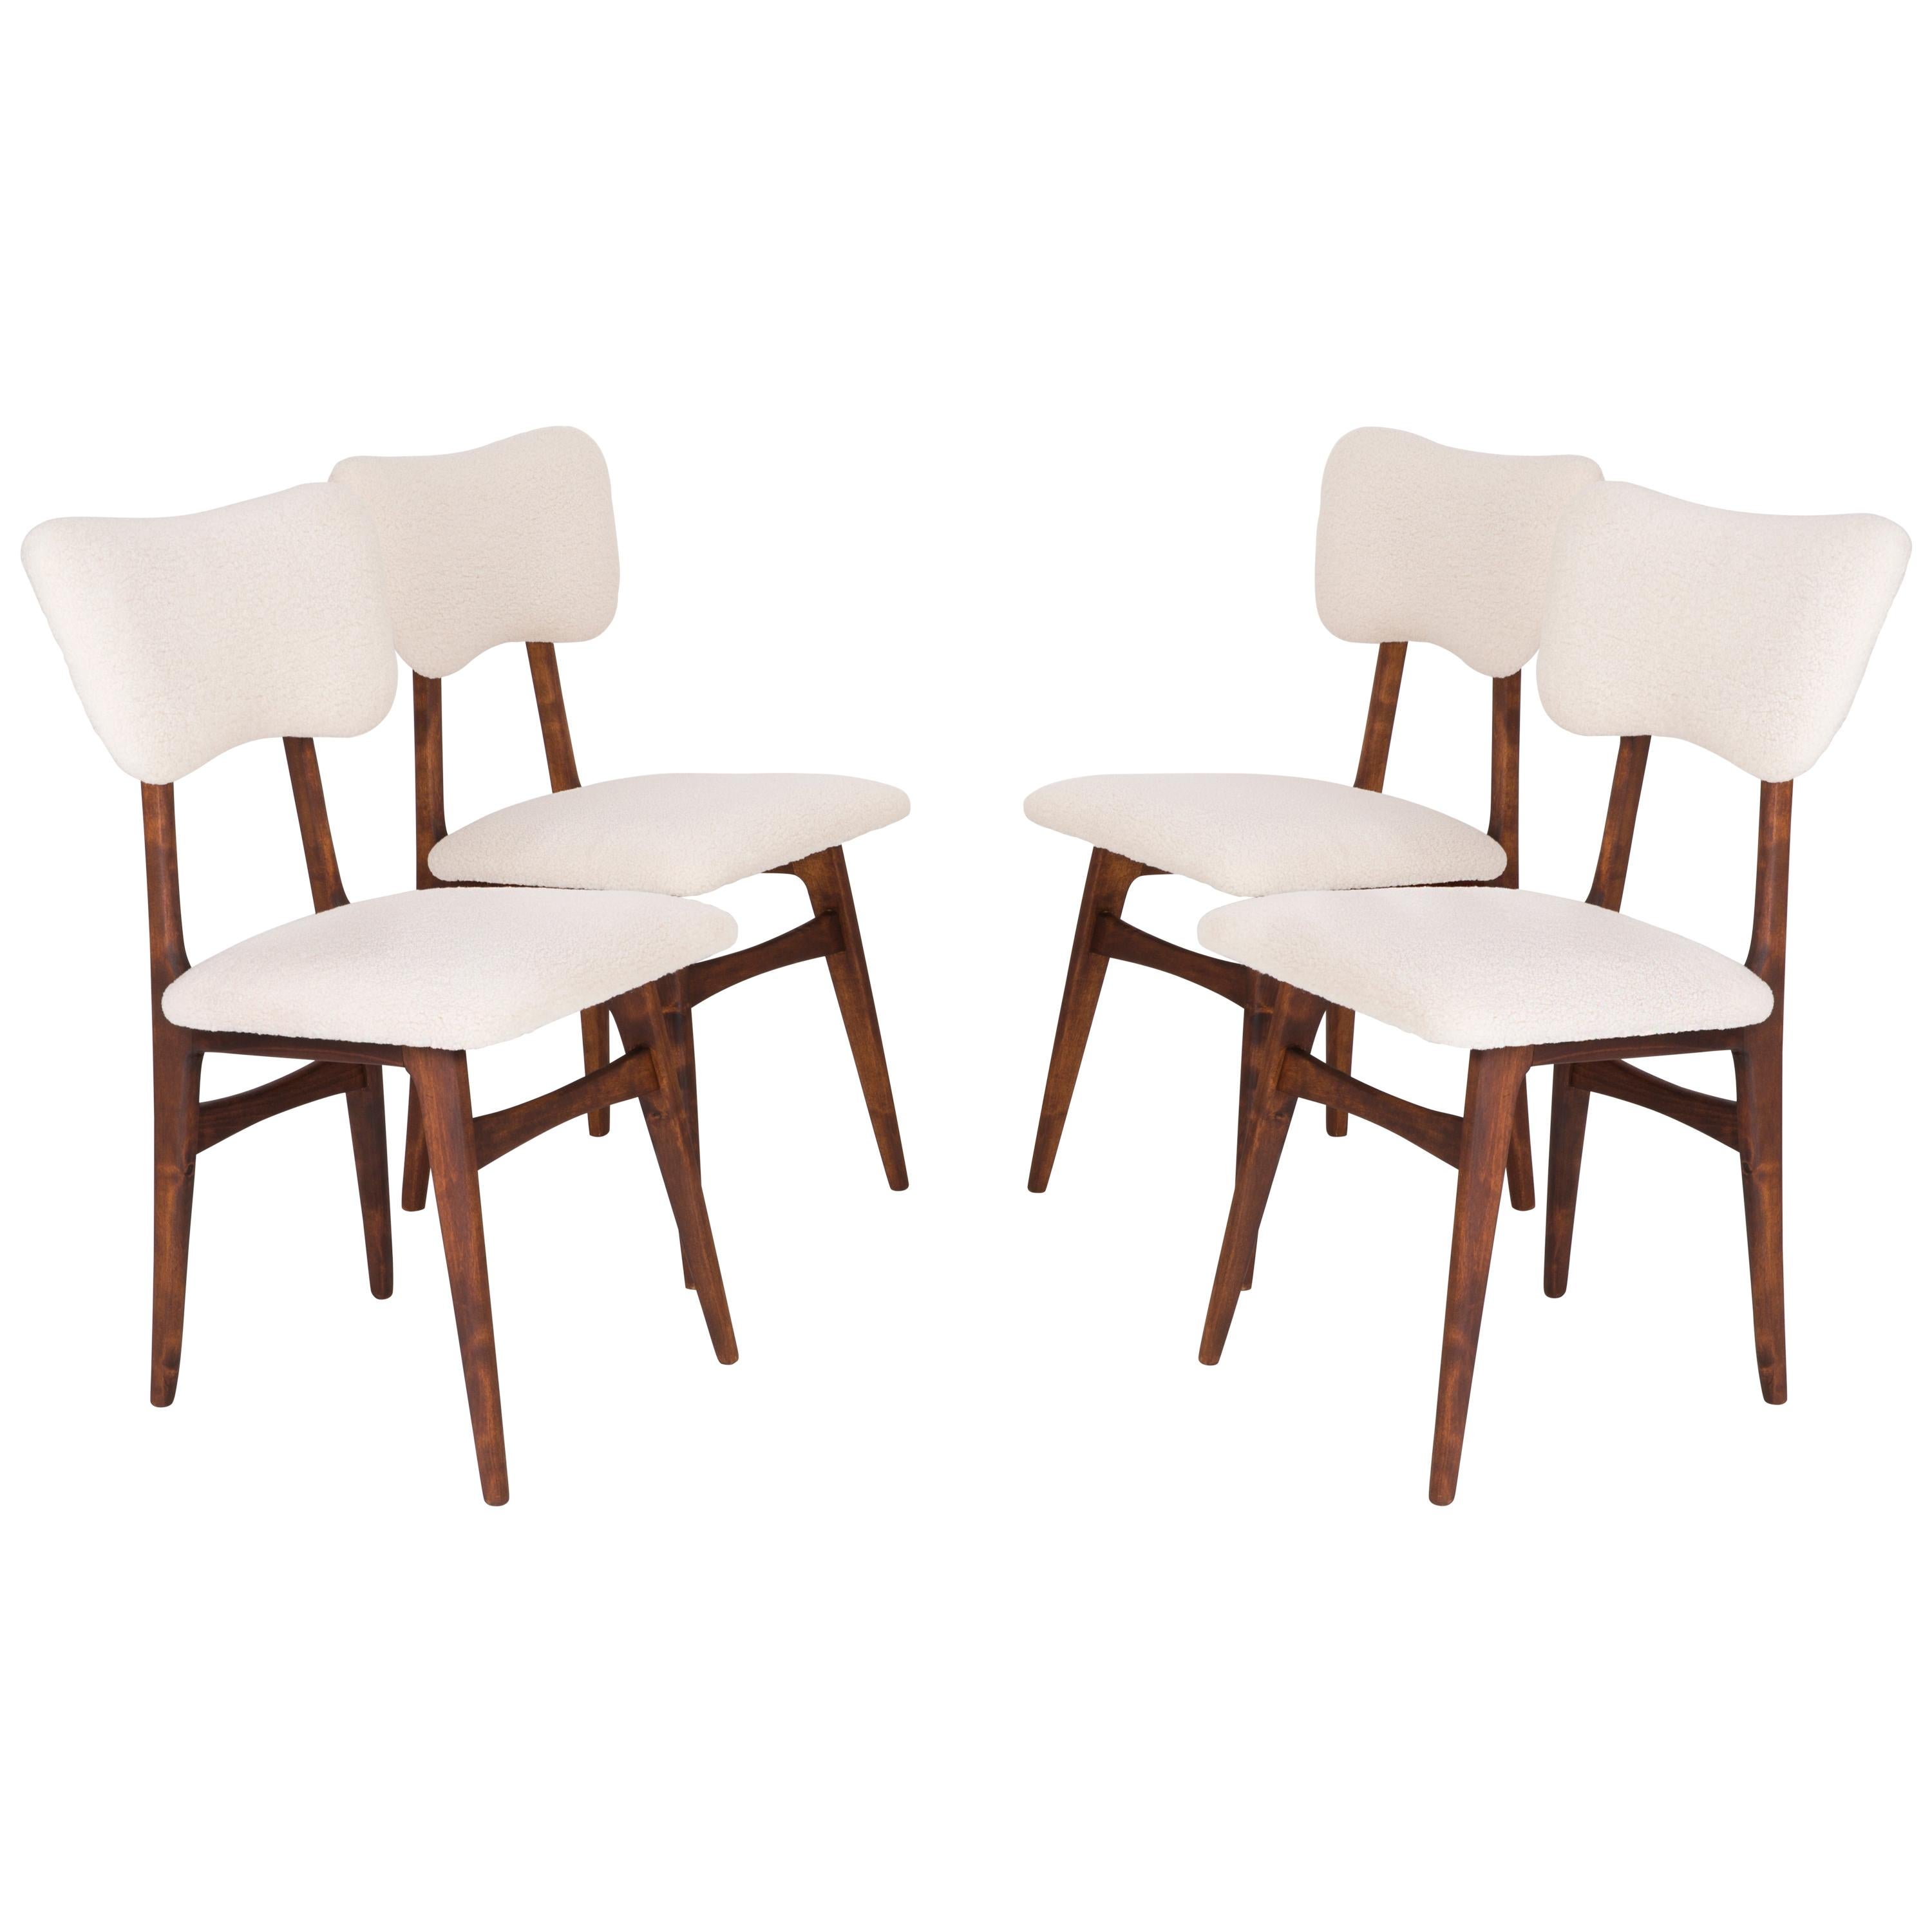 Set of Four 20th Century Light Crème Boucle Chairs, 1960s